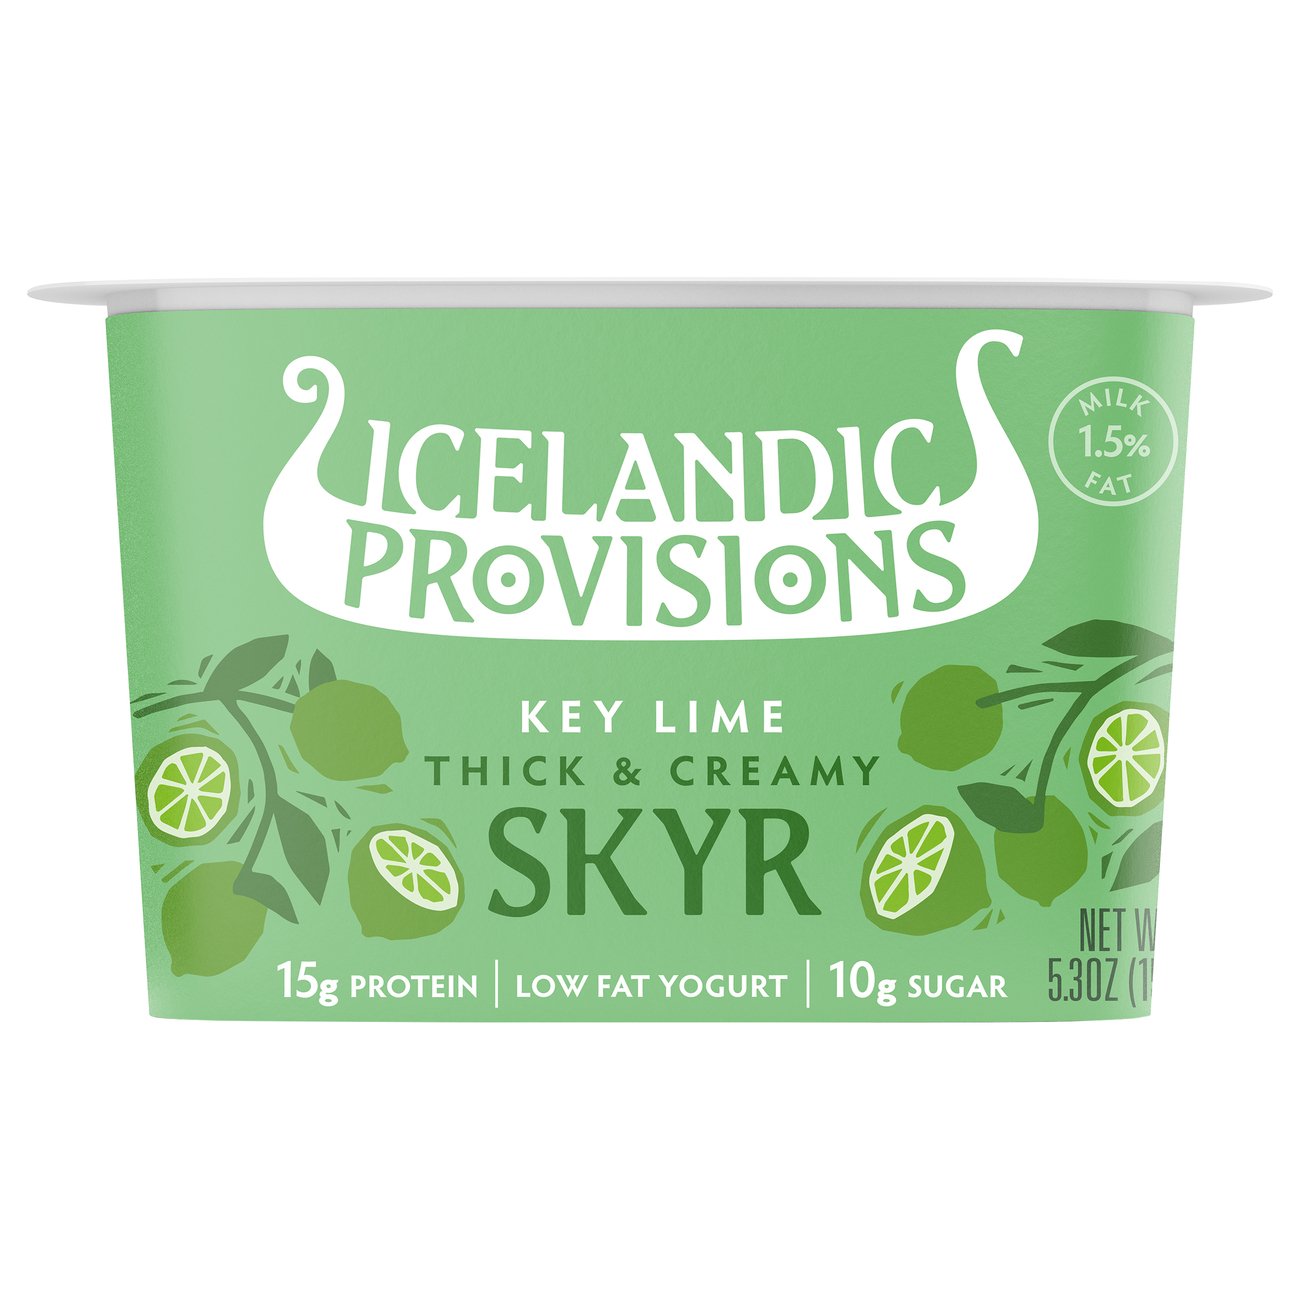 Icelandic Provisions Key Lime Traditional Skyr, 5.3 Ounce - 12 per case.